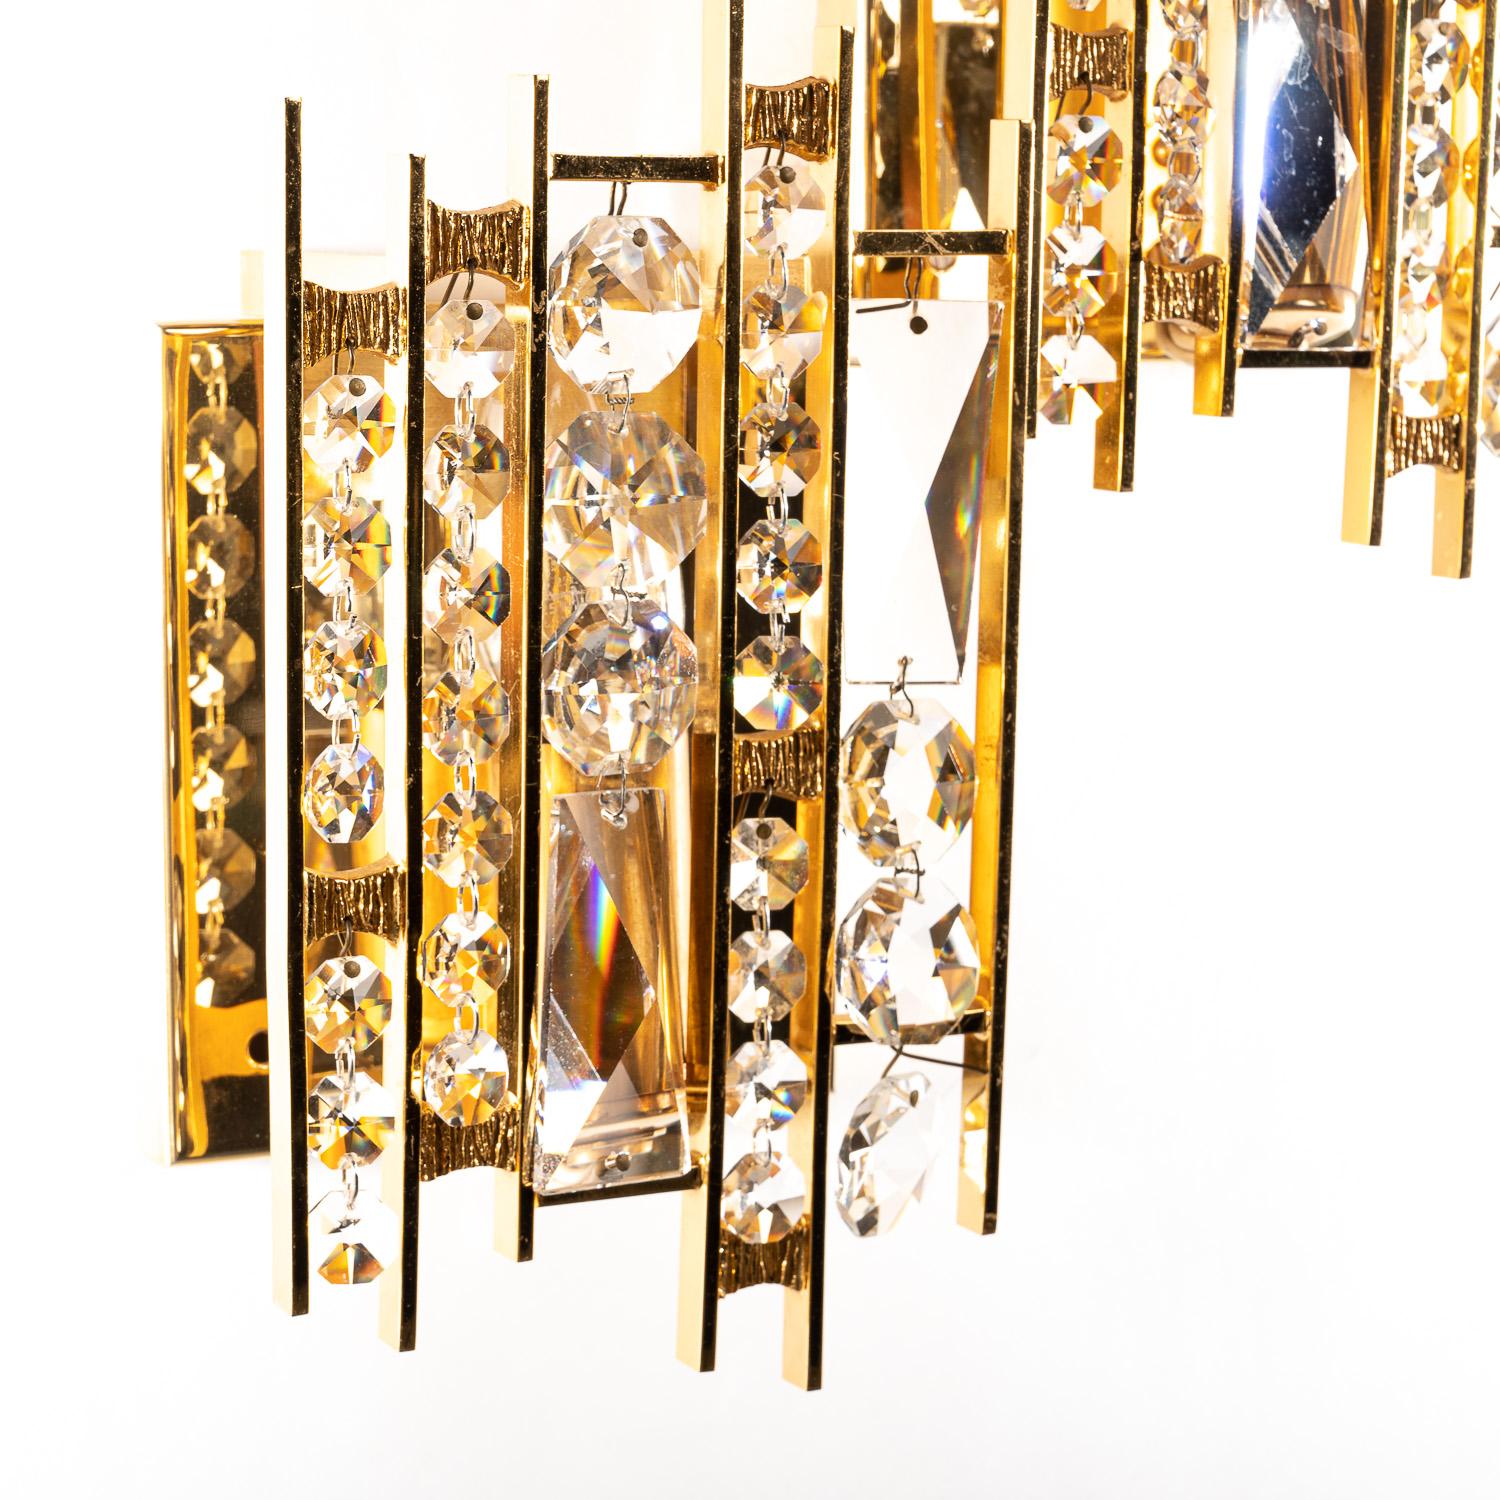 This piece comes in three parts, meaning the sections can be separated and worked into your space individually. It's a super-intricate design from gilt-brass made to the high-standards you'd expect with luxury lighting. If you want to give your room